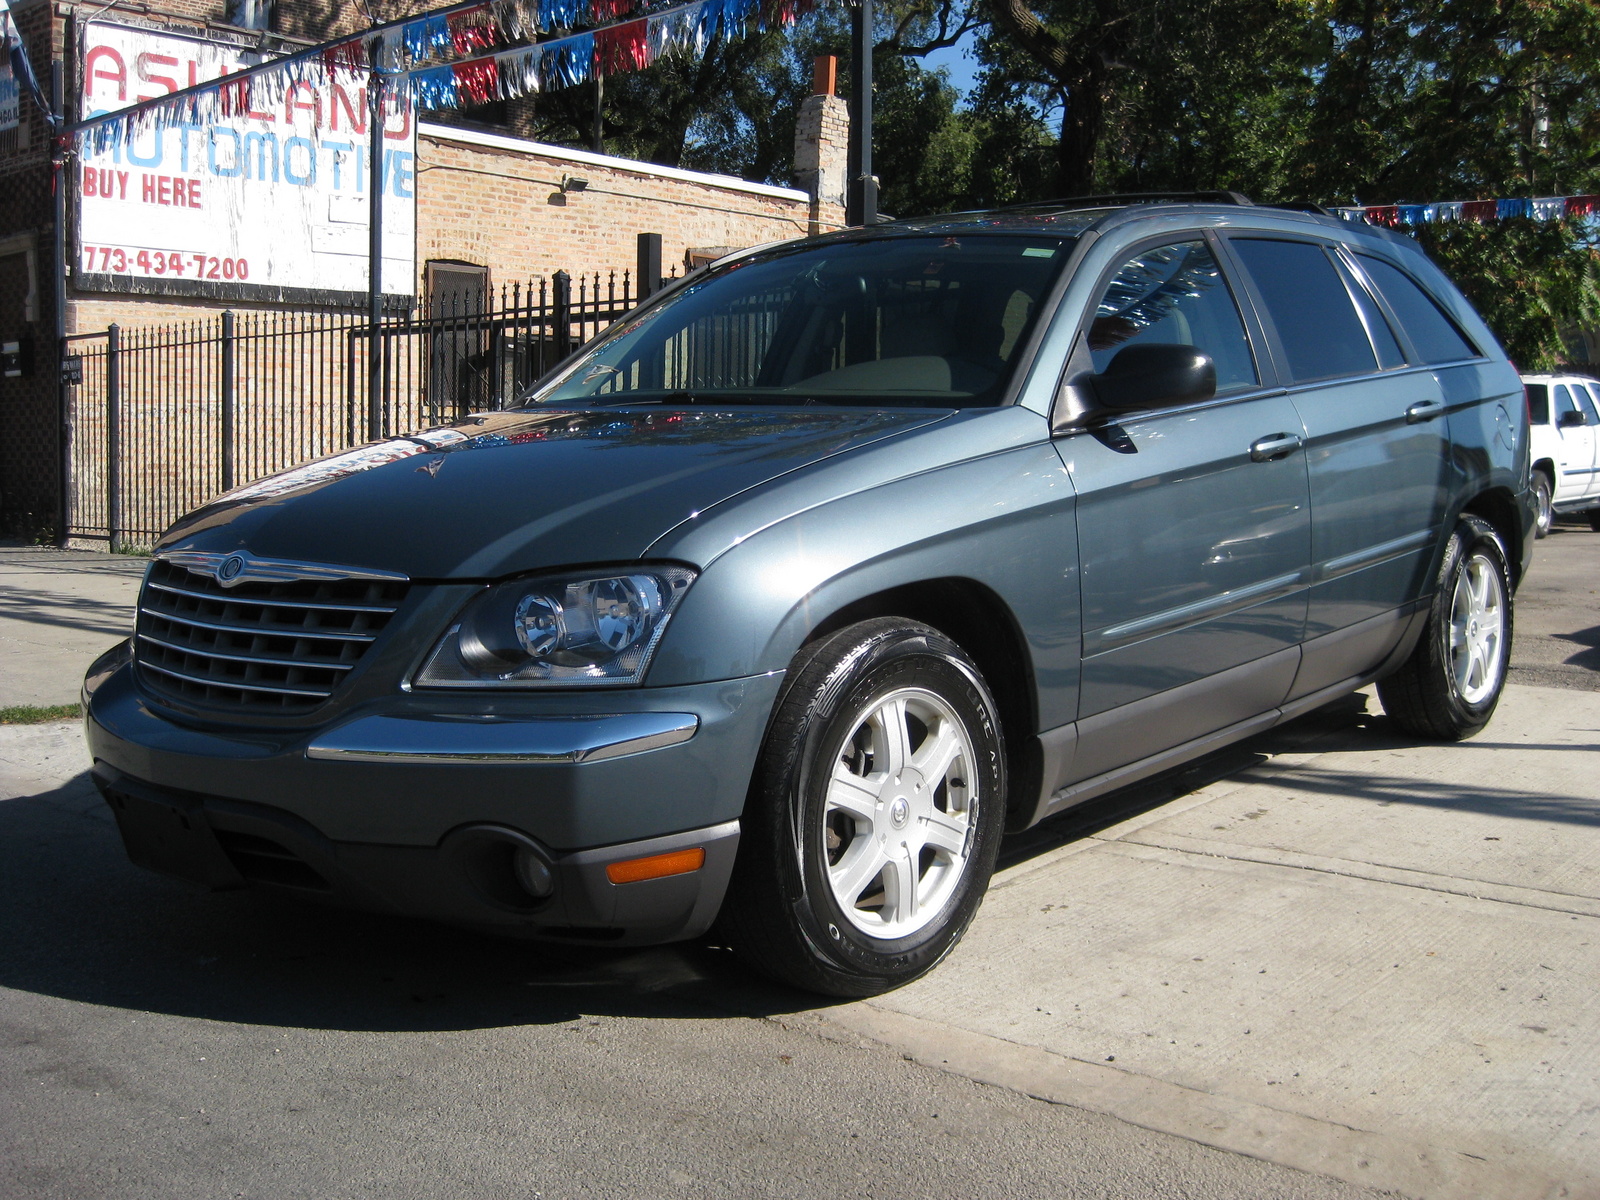 2005 Chrysler pacifica base review #2